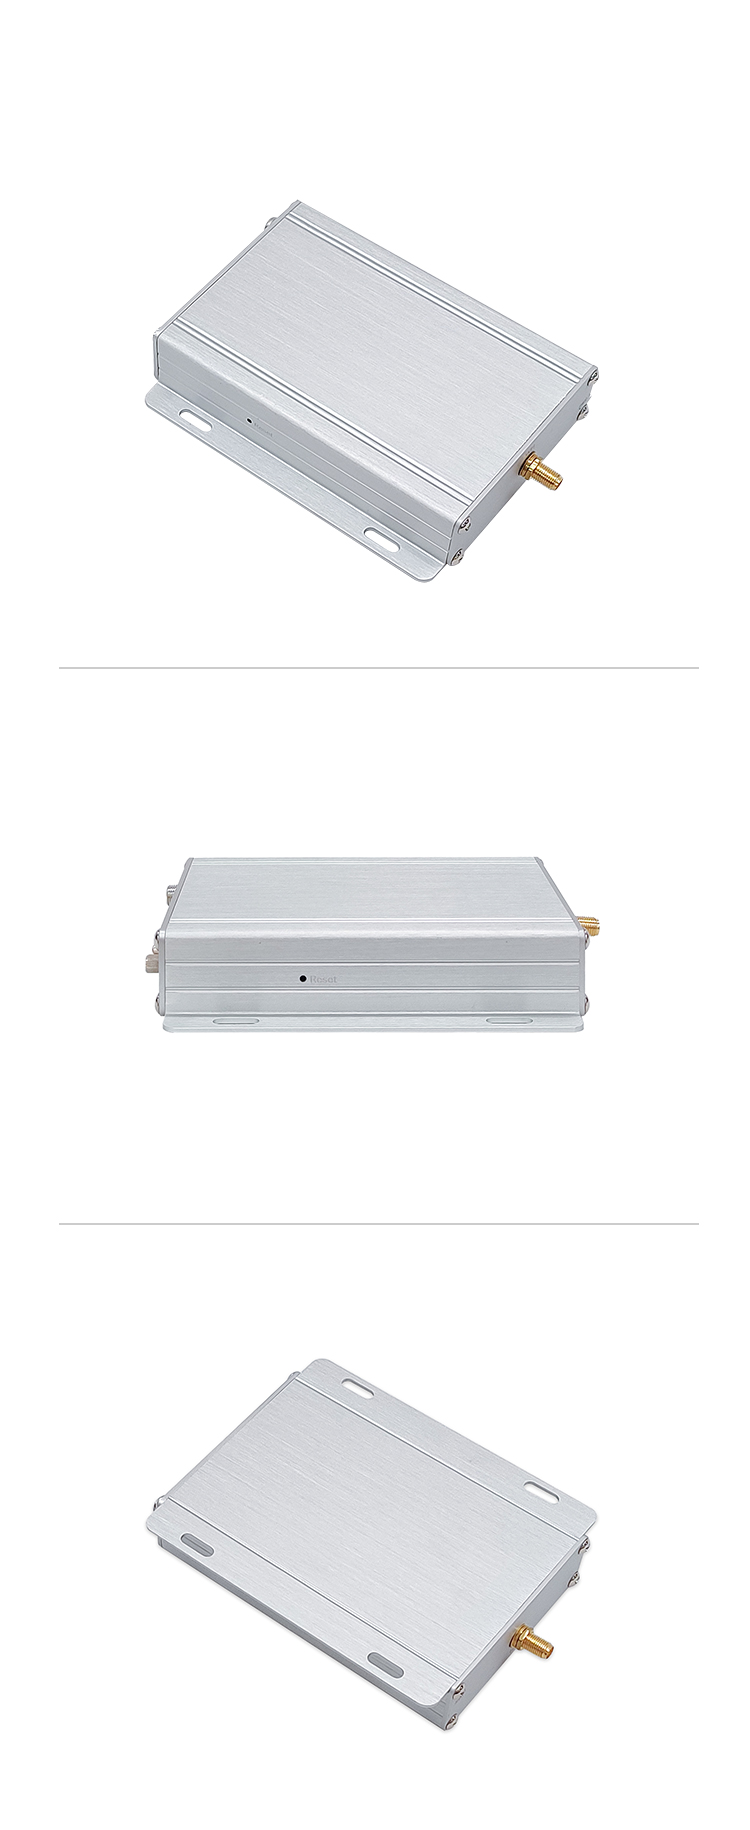 High Frequency Industrial RFID Reader , Single Channel Fixed RFID Reader With One Relay